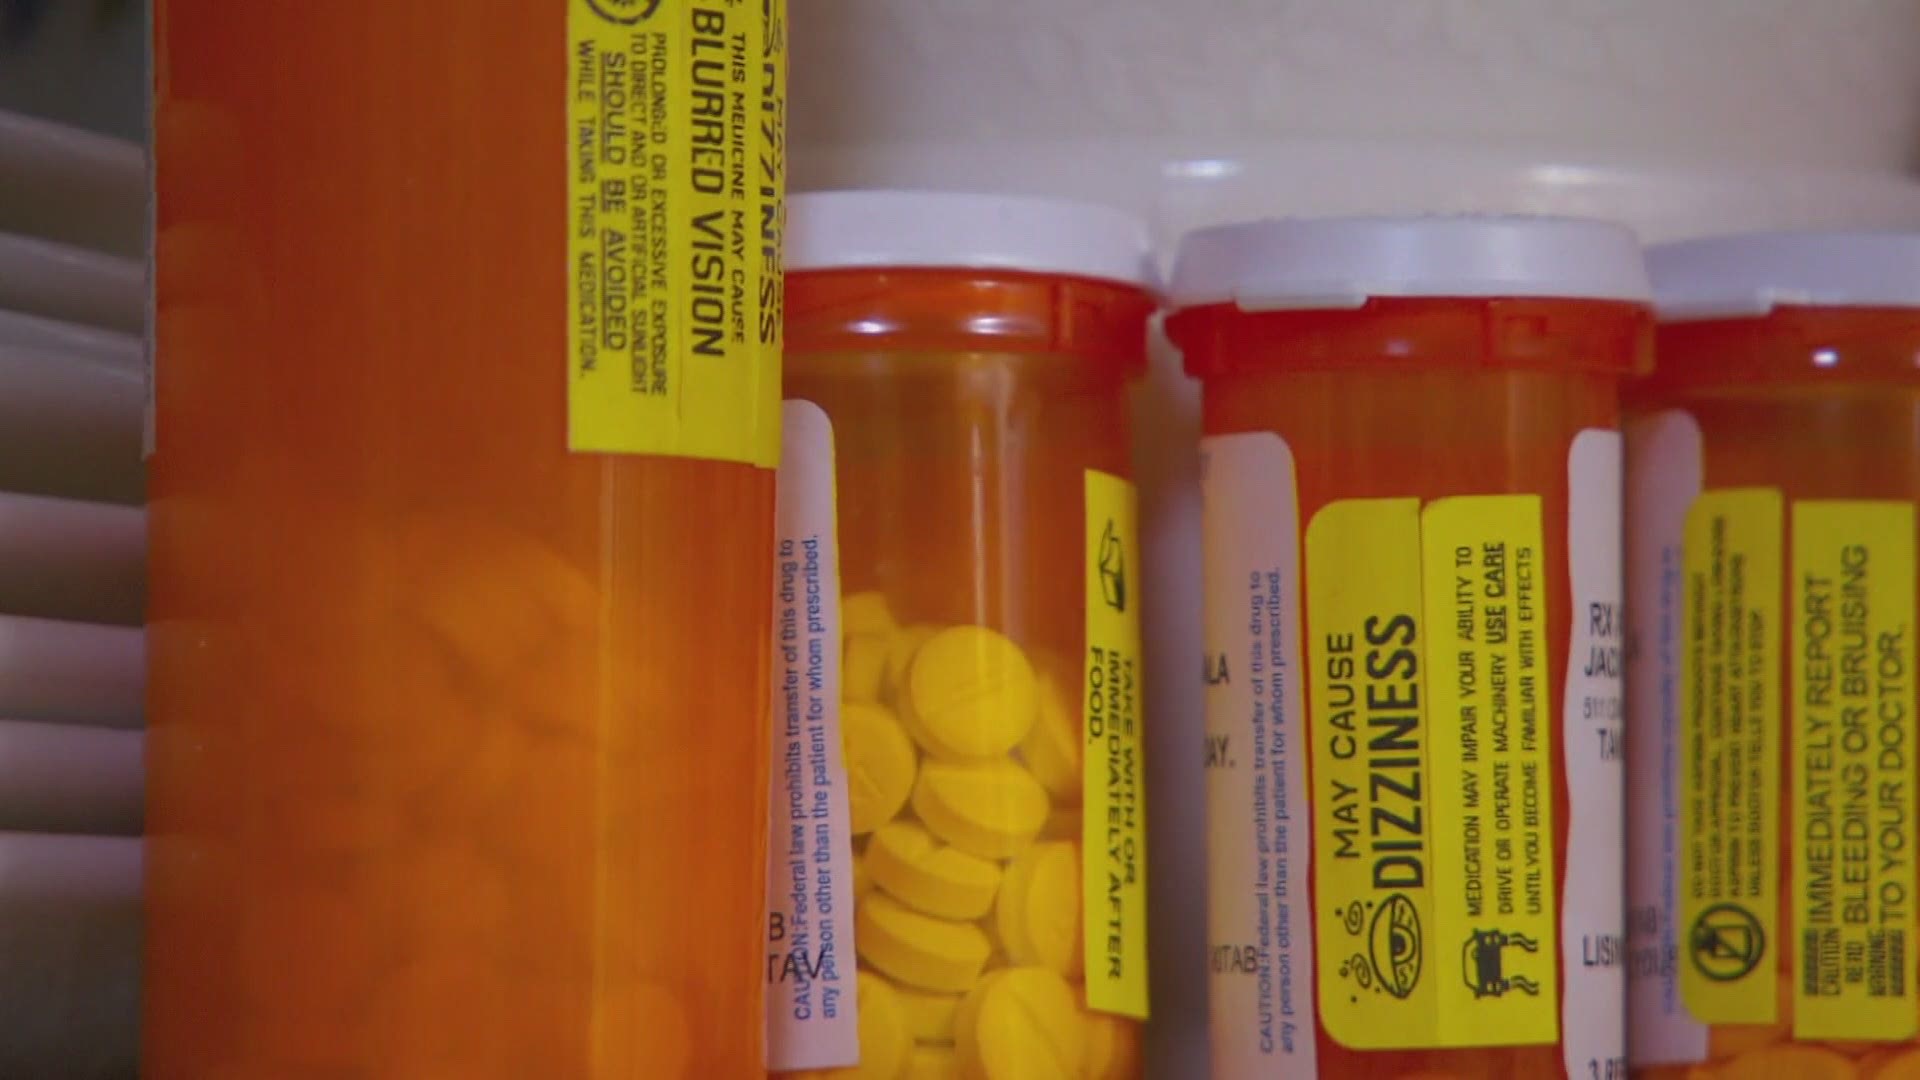 Legislators are specifically looking at prescription drug costs, hoping to give more Mainers an opportunity to get the best care that is available.